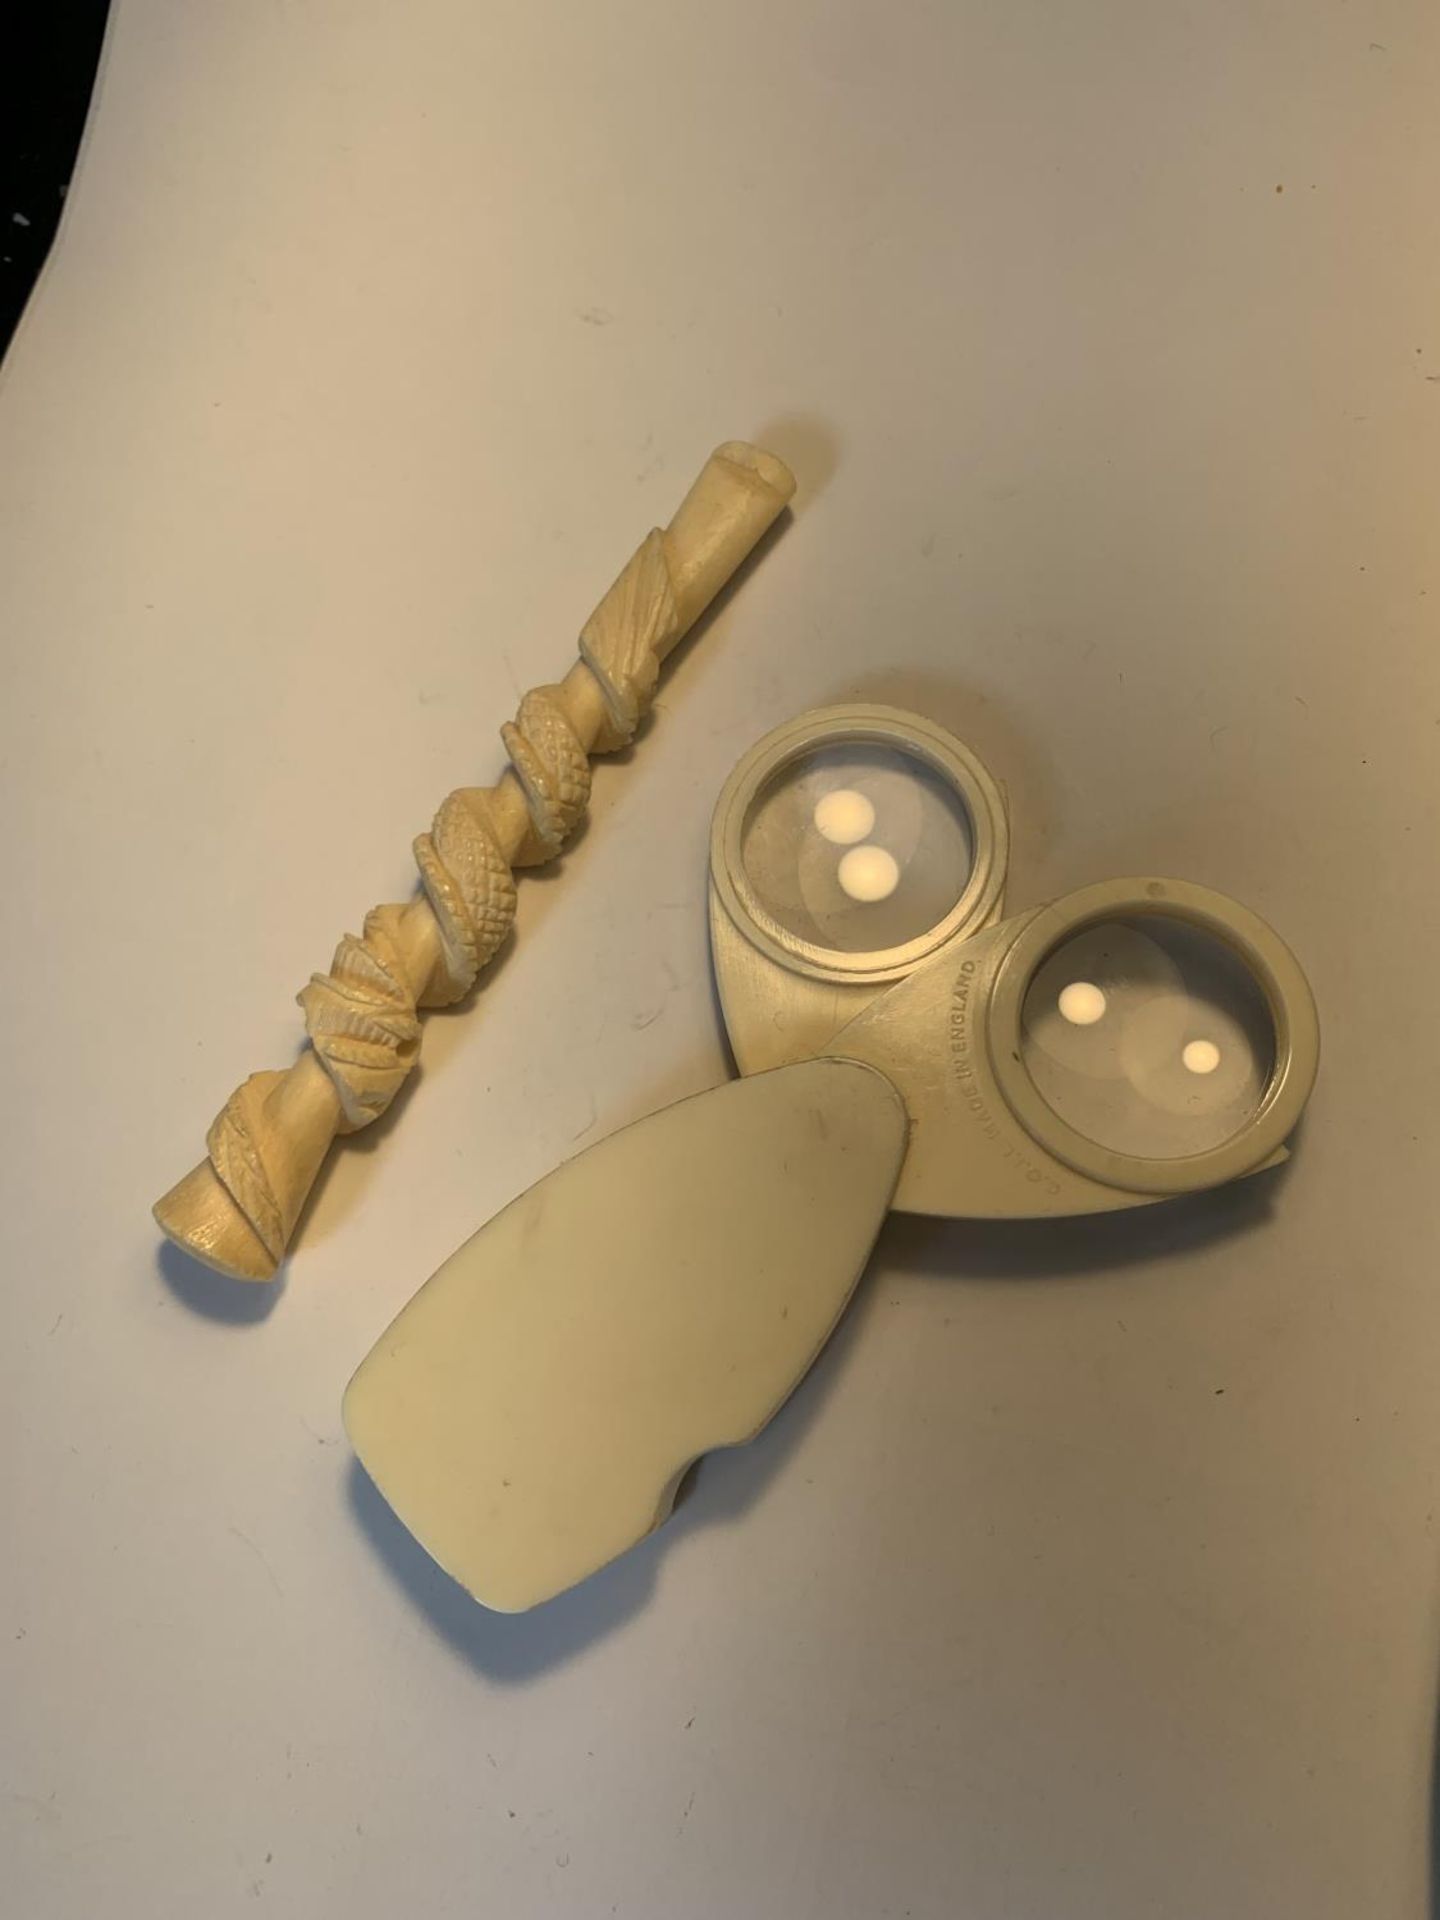 A BONE CHEROOT HOLDER AND MAGNIFYING GLASS